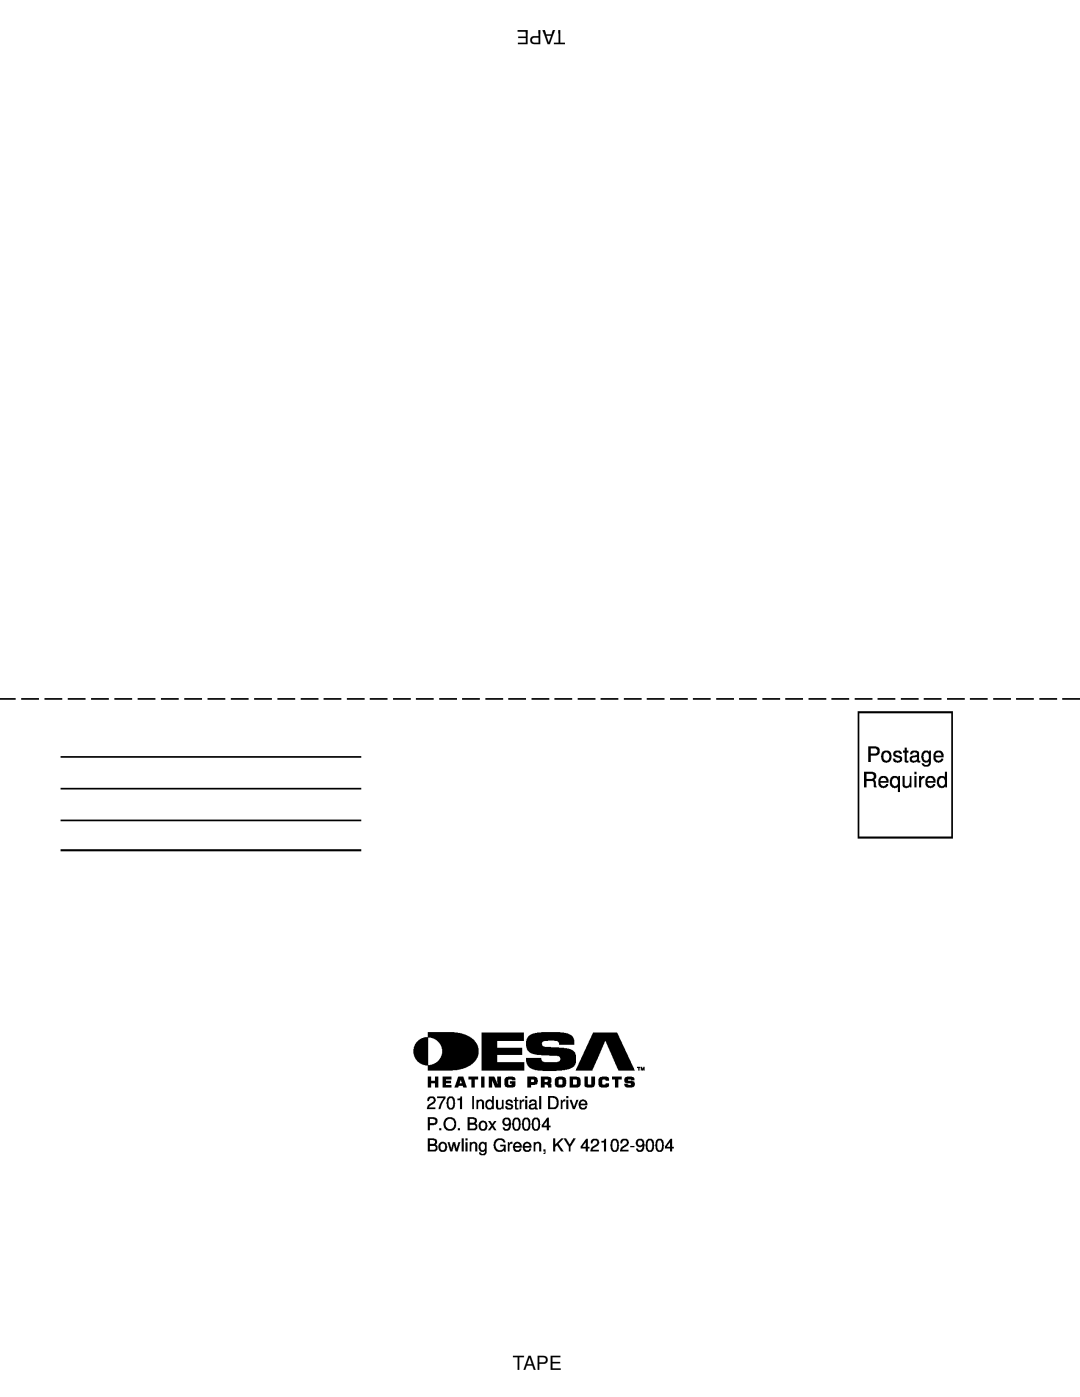 Desa REM30LP owner manual Postage Required, Tape, Industrial Drive P.O. Box Bowling Green, KY 